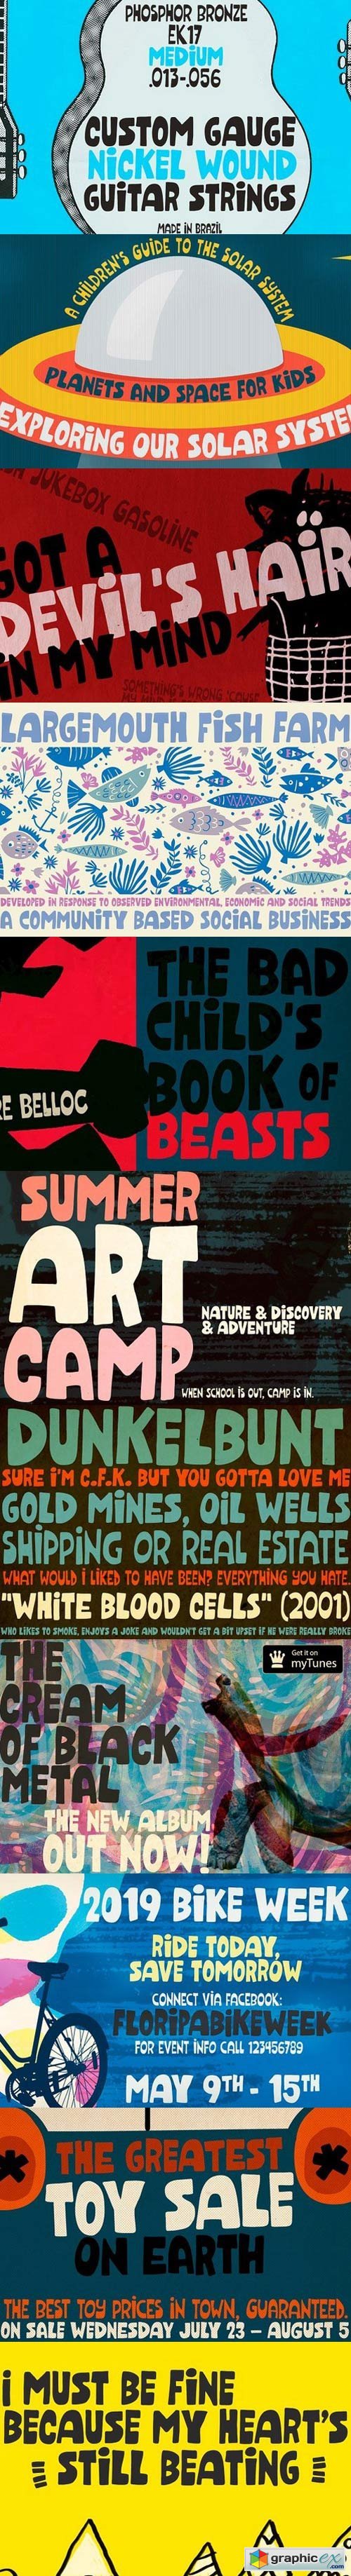 Dunkelbunt Introductory